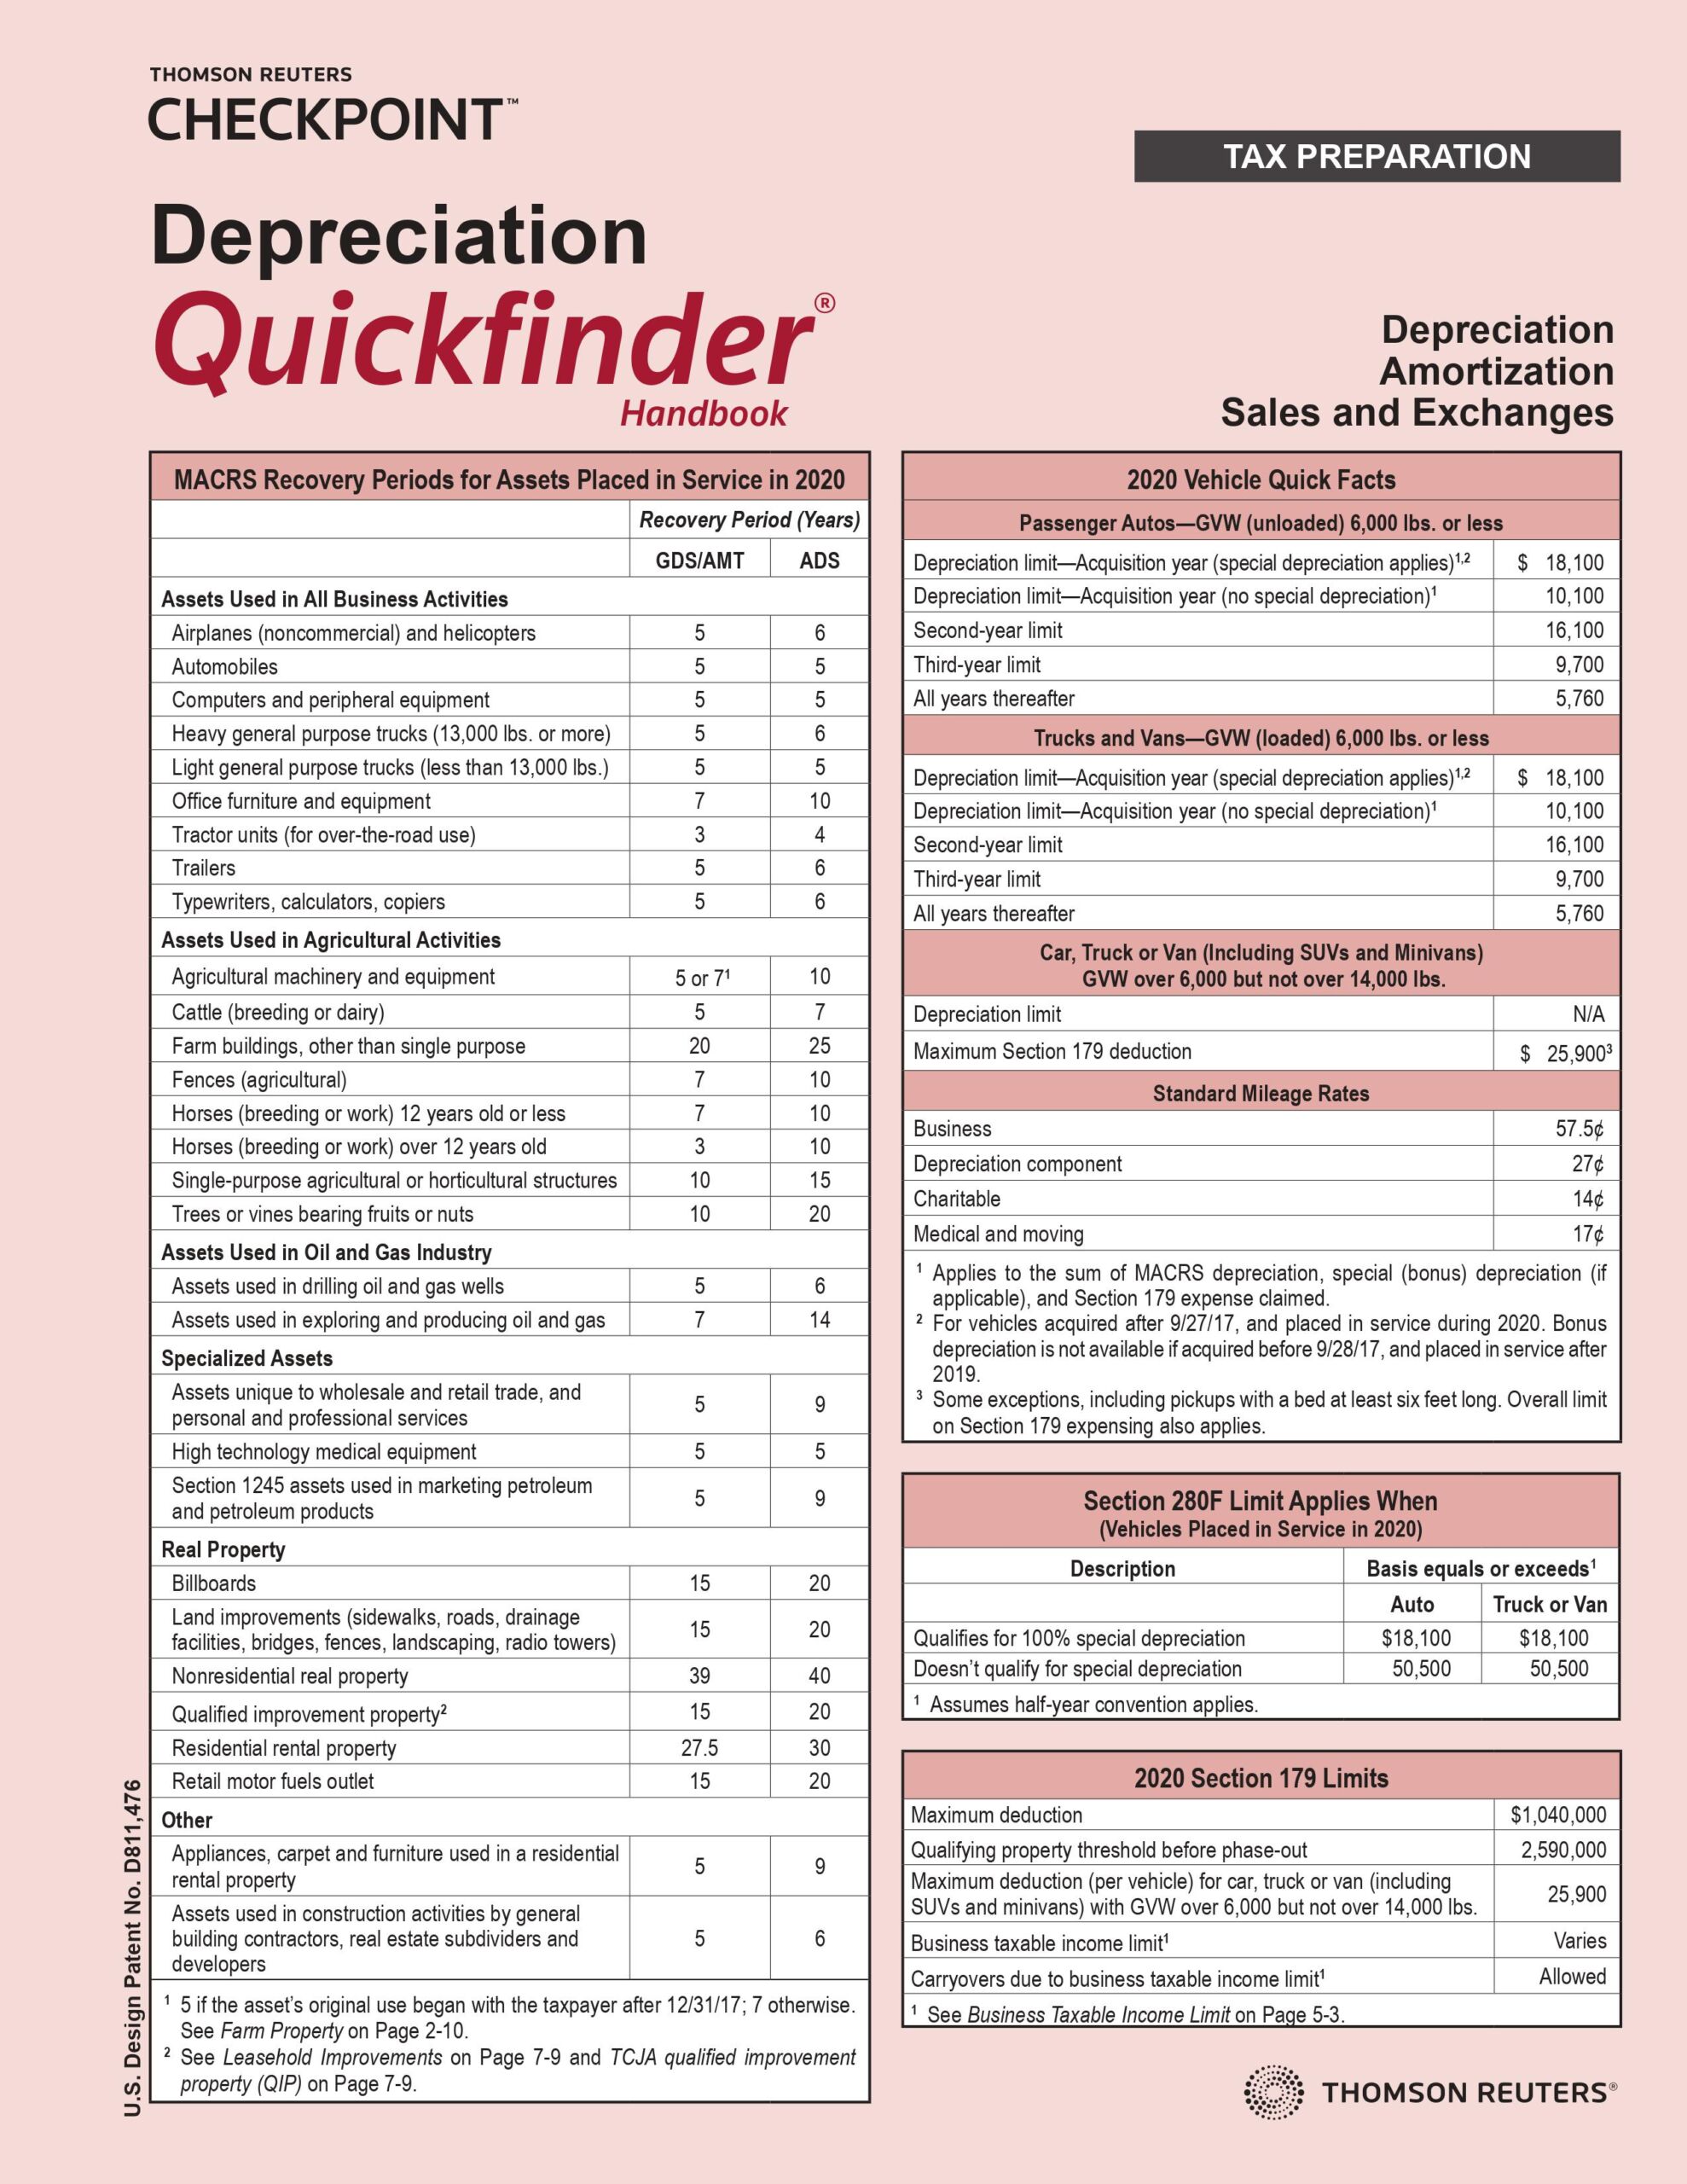 Overview of the Depreciation Quickfinder guide from Thomson Reuters Checkpoint